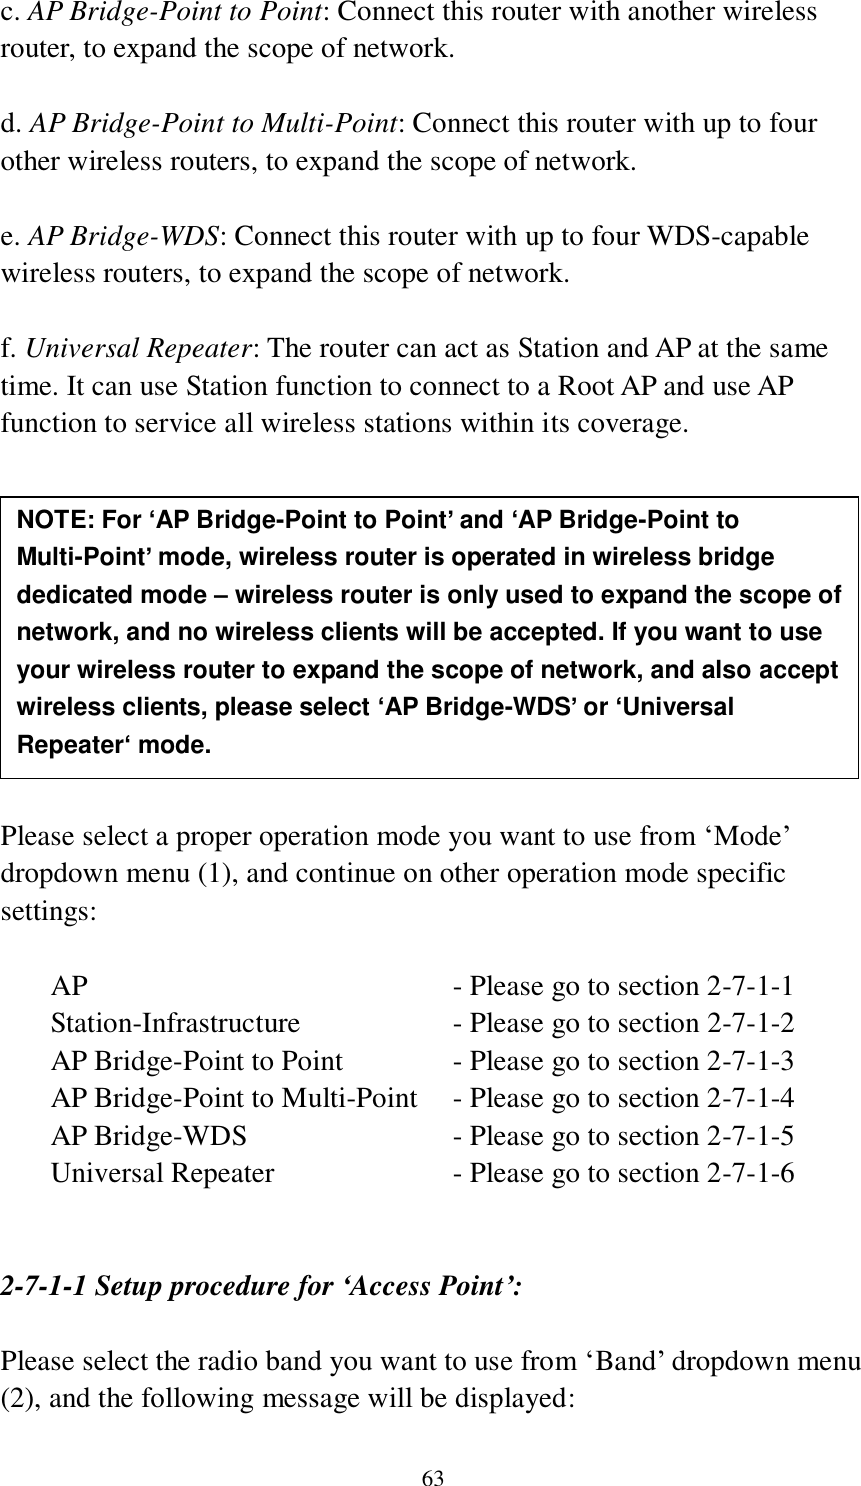 63 c. AP Bridge-Point to Point: Connect this router with another wireless router, to expand the scope of network.    d. AP Bridge-Point to Multi-Point: Connect this router with up to four other wireless routers, to expand the scope of network.  e. AP Bridge-WDS: Connect this router with up to four WDS-capable wireless routers, to expand the scope of network.  f. Universal Repeater: The router can act as Station and AP at the same time. It can use Station function to connect to a Root AP and use AP function to service all wireless stations within its coverage.           Please select a proper operation mode you want to use from „Mode‟ dropdown menu (1), and continue on other operation mode specific settings:  AP                - Please go to section 2-7-1-1 Station-Infrastructure        - Please go to section 2-7-1-2 AP Bridge-Point to Point     - Please go to section 2-7-1-3 AP Bridge-Point to Multi-Point  - Please go to section 2-7-1-4 AP Bridge-WDS         - Please go to section 2-7-1-5 Universal Repeater          - Please go to section 2-7-1-6   2-7-1-1 Setup procedure for ‘Access Point’:  Please select the radio band you want to use from „Band‟ dropdown menu (2), and the following message will be displayed: NOTE: For ‘AP Bridge-Point to Point’ and ‘AP Bridge-Point to Multi-Point’ mode, wireless router is operated in wireless bridge dedicated mode – wireless router is only used to expand the scope of network, and no wireless clients will be accepted. If you want to use your wireless router to expand the scope of network, and also accept wireless clients, please select ‘AP Bridge-WDS’ or ‘Universal Repeater‘ mode. 